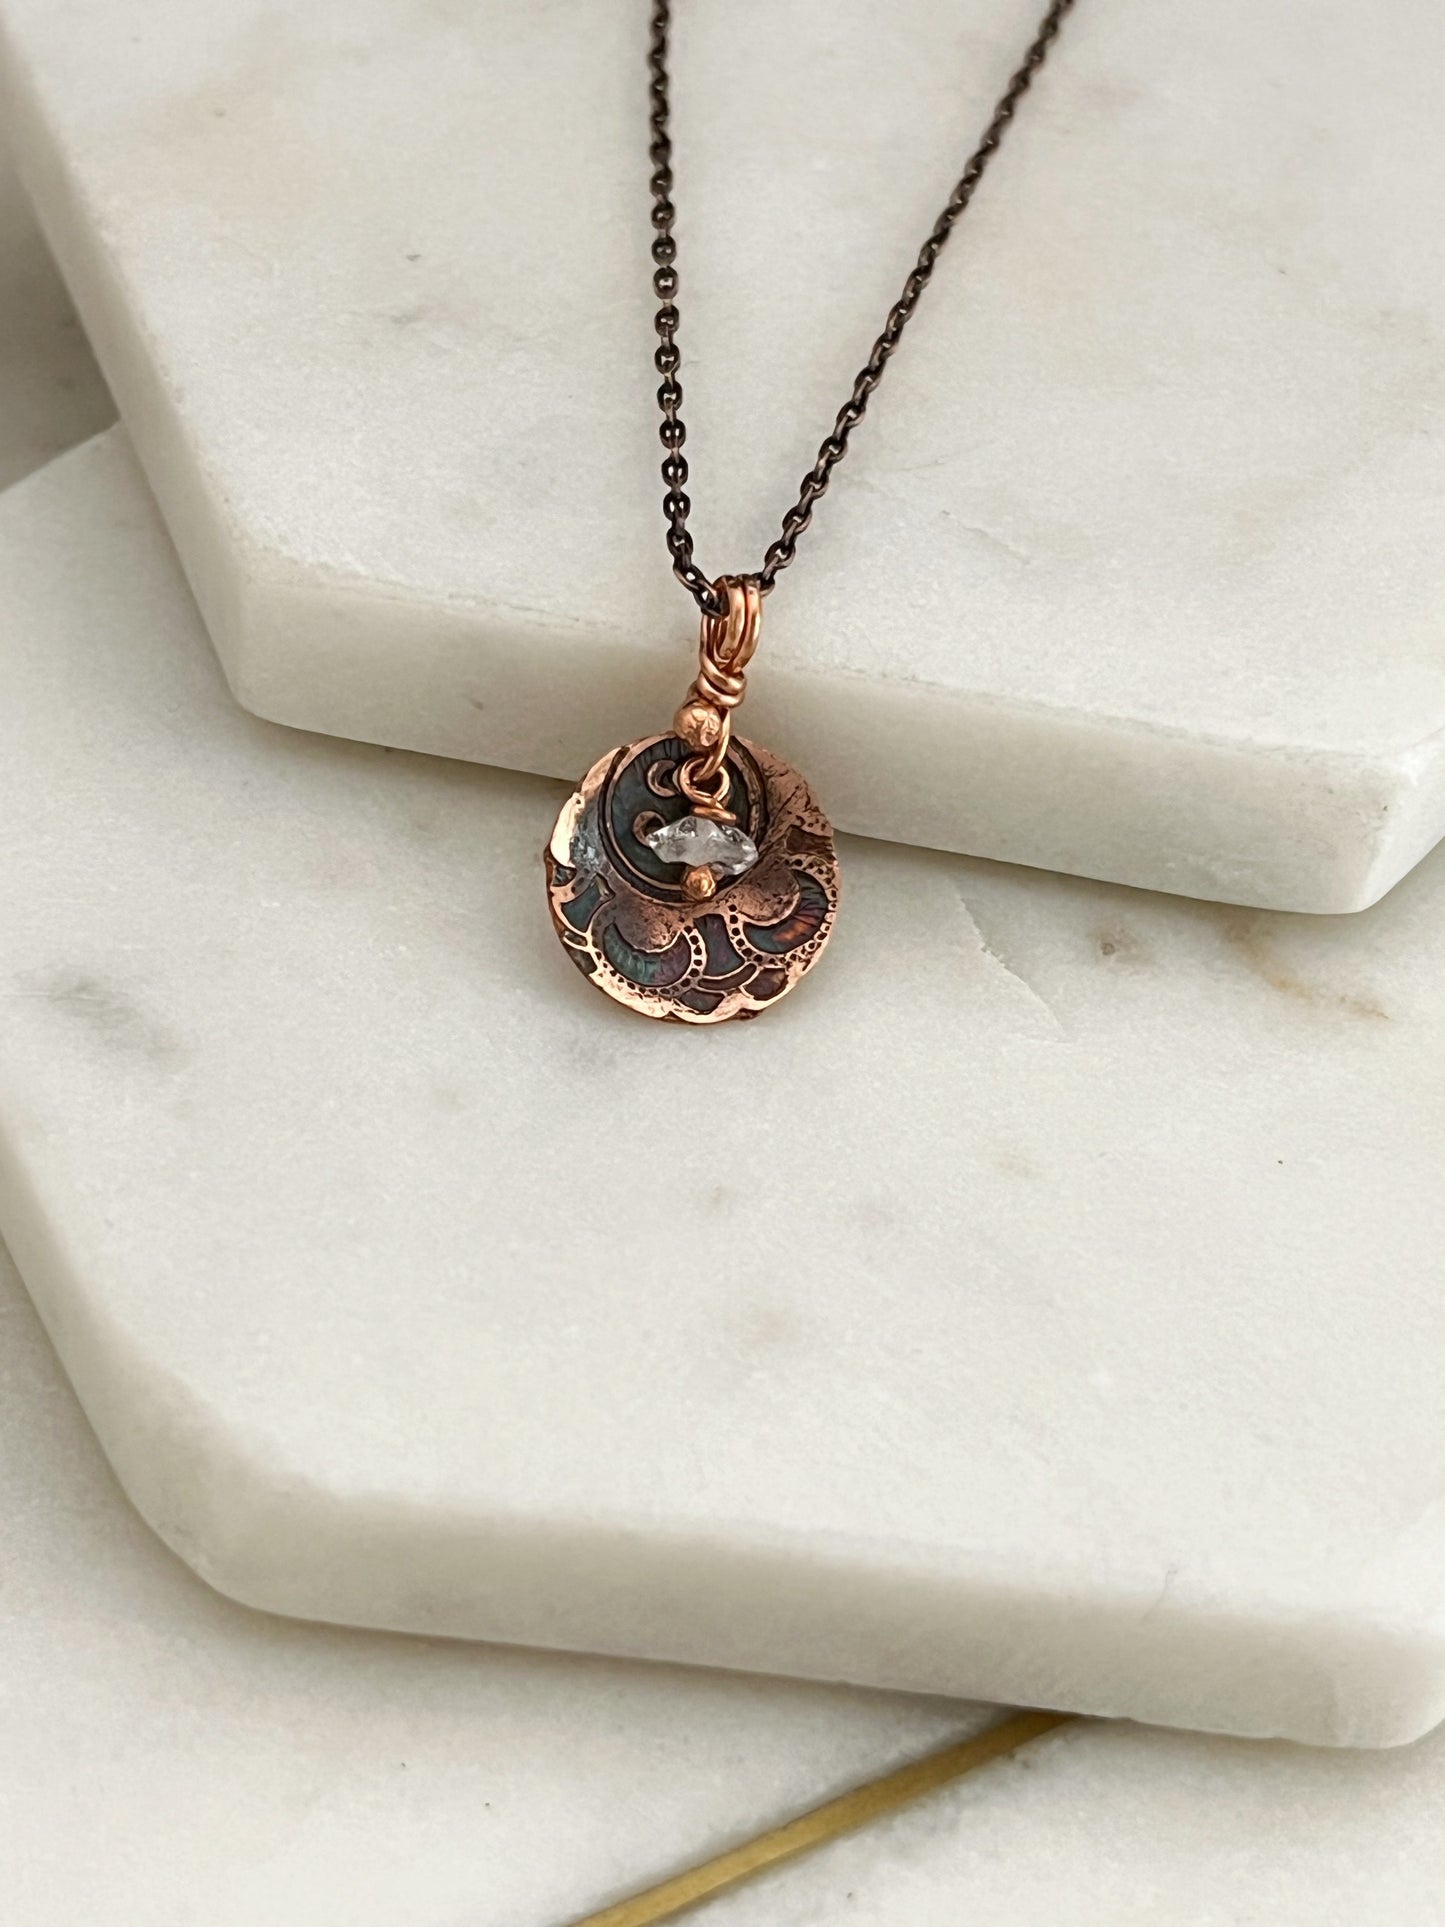 Acid etched copper necklace with herkimer diamond gemstone